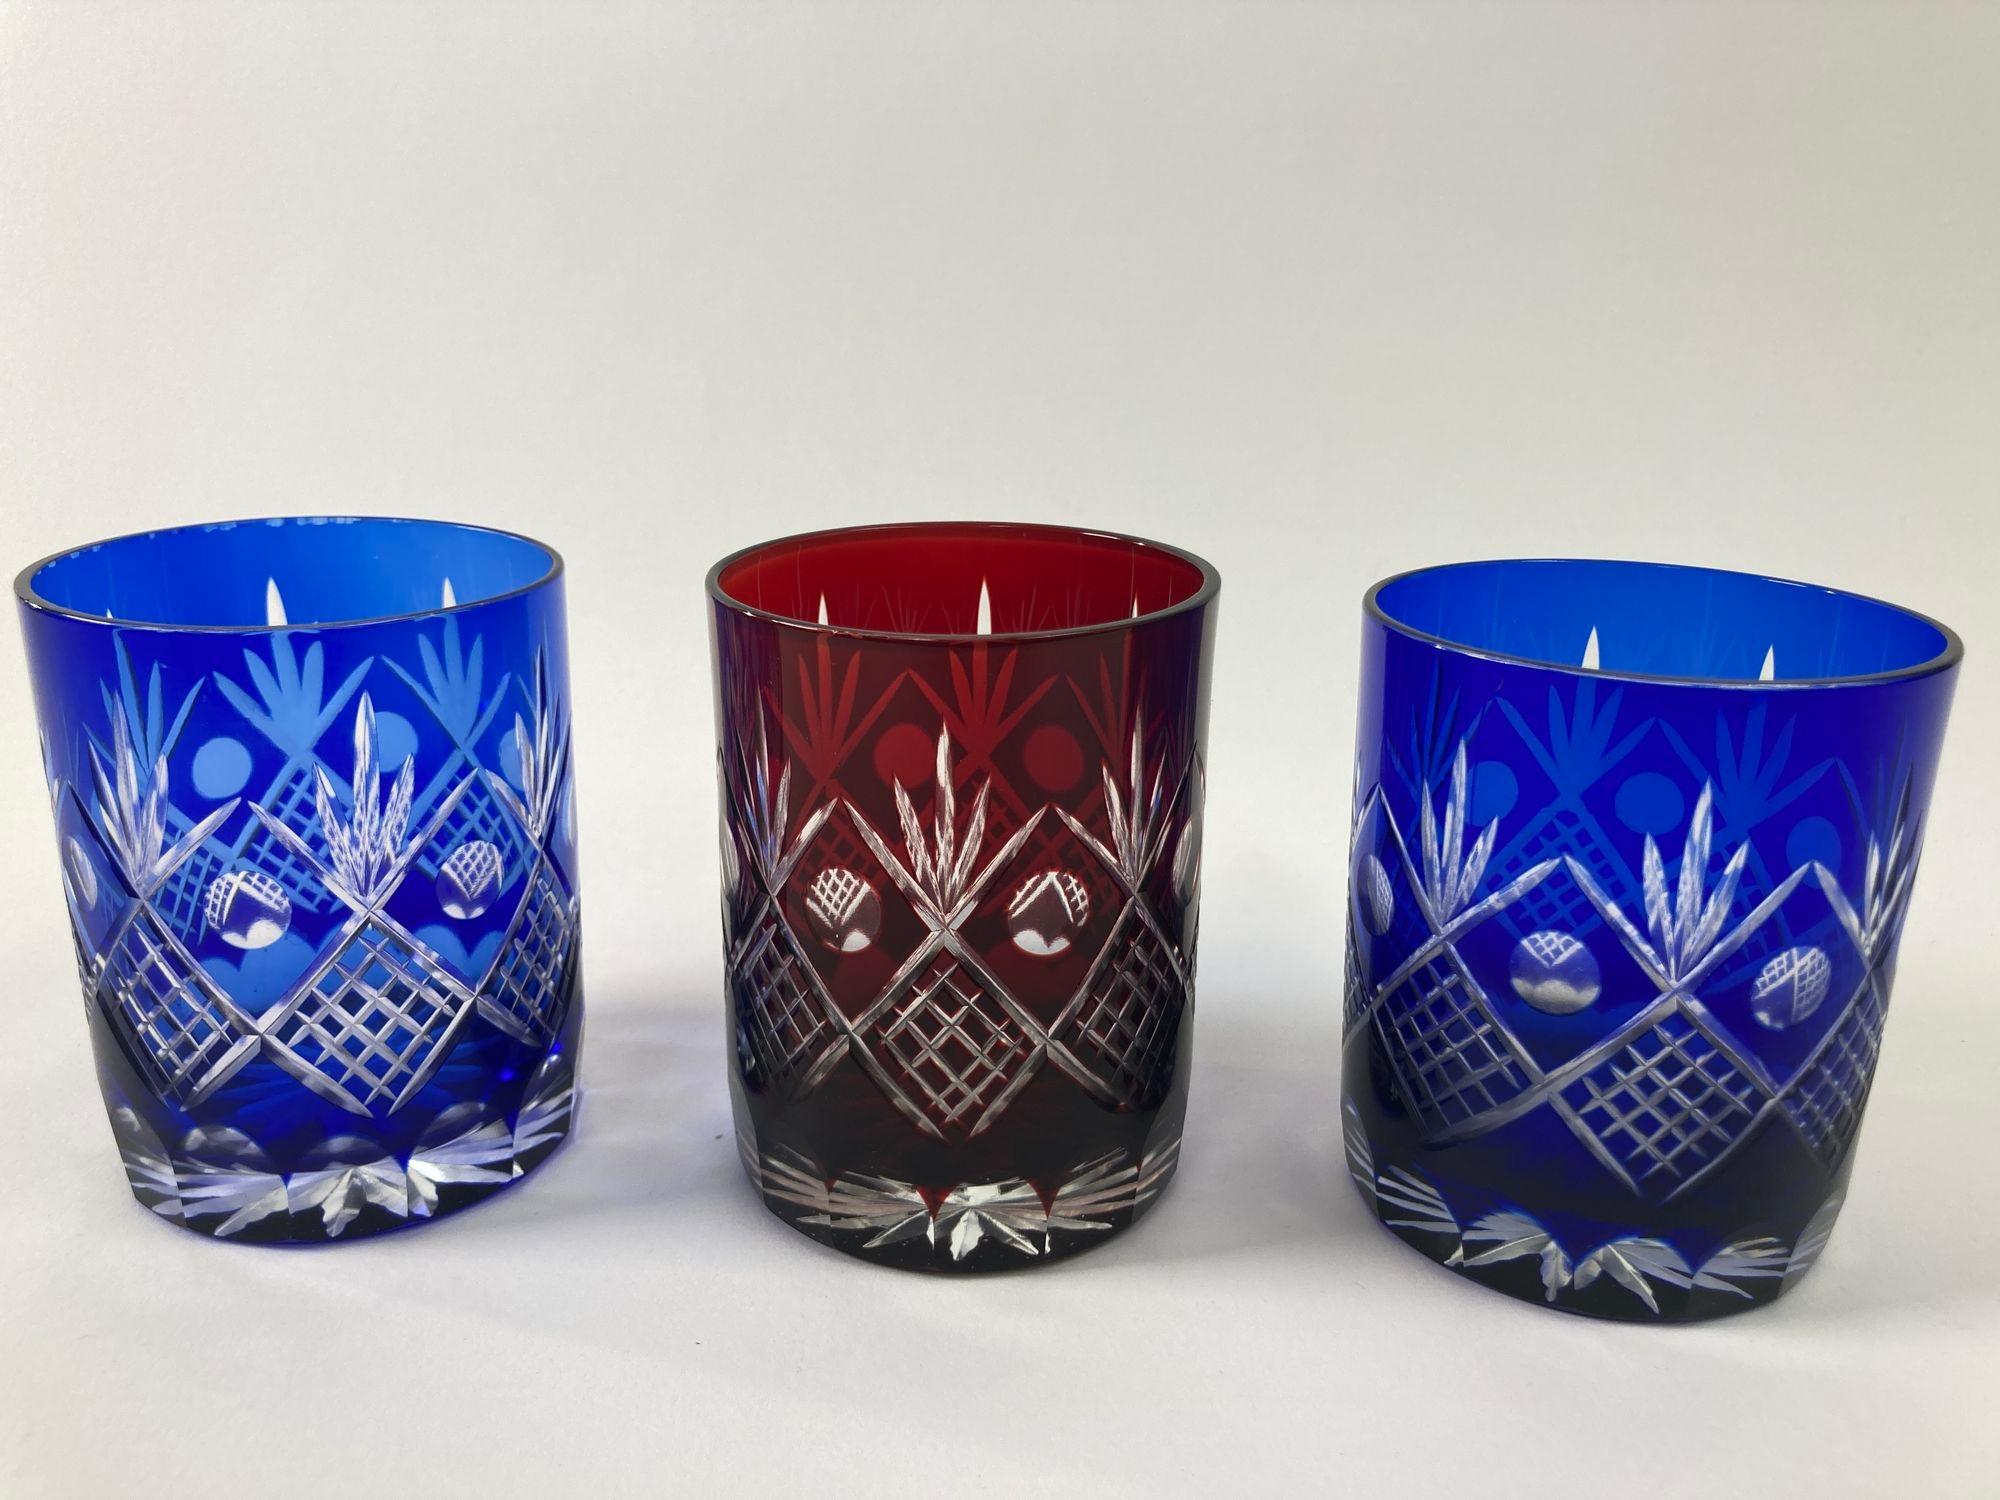 1970 Whiskey Glasses Tumbler Baccarat Style Sapphire Blue and Ruby Red Cut Crystal Set of 3.
Set of three vintage whiskey glasses tumbler cobalt blue and ruby red crystal Baccarat style.
Exquisite Bohemian Czech crystal cut drinking rock